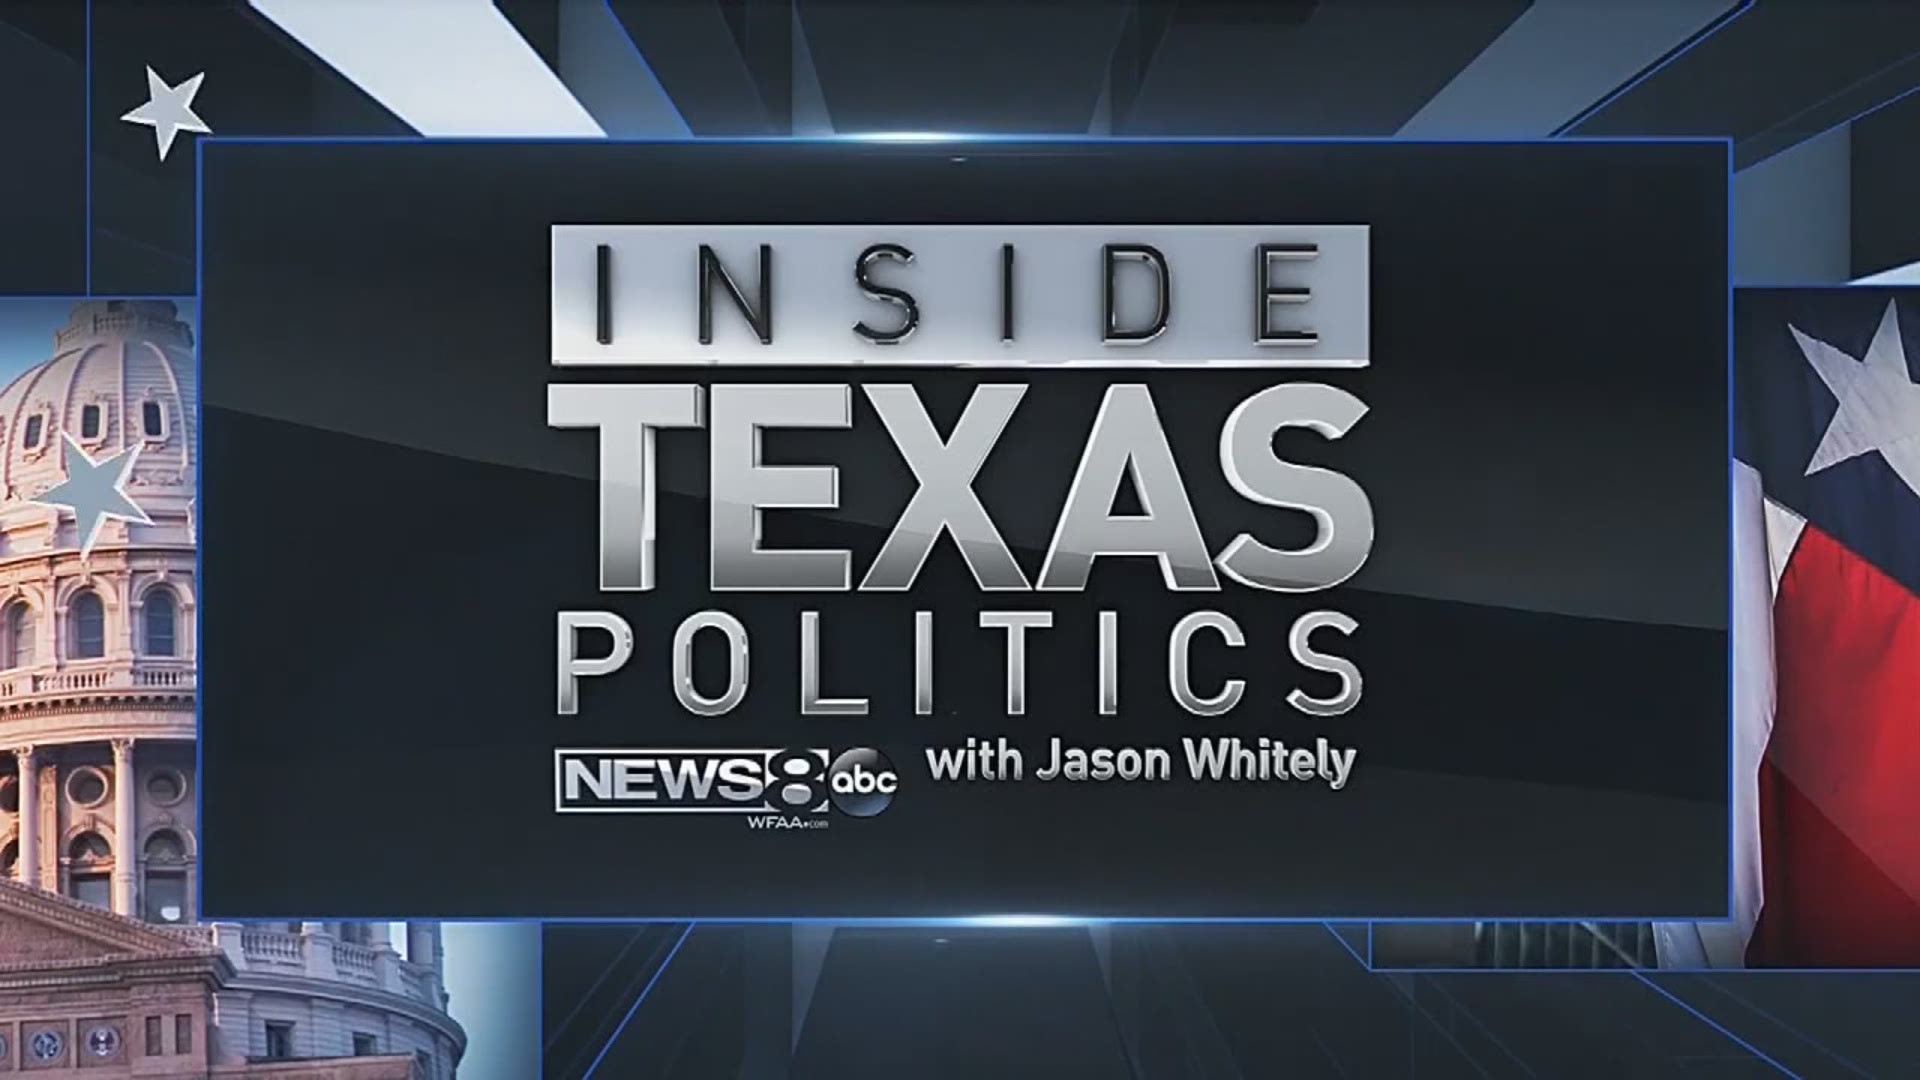 Political experts discuss the upcoming Texas primary.